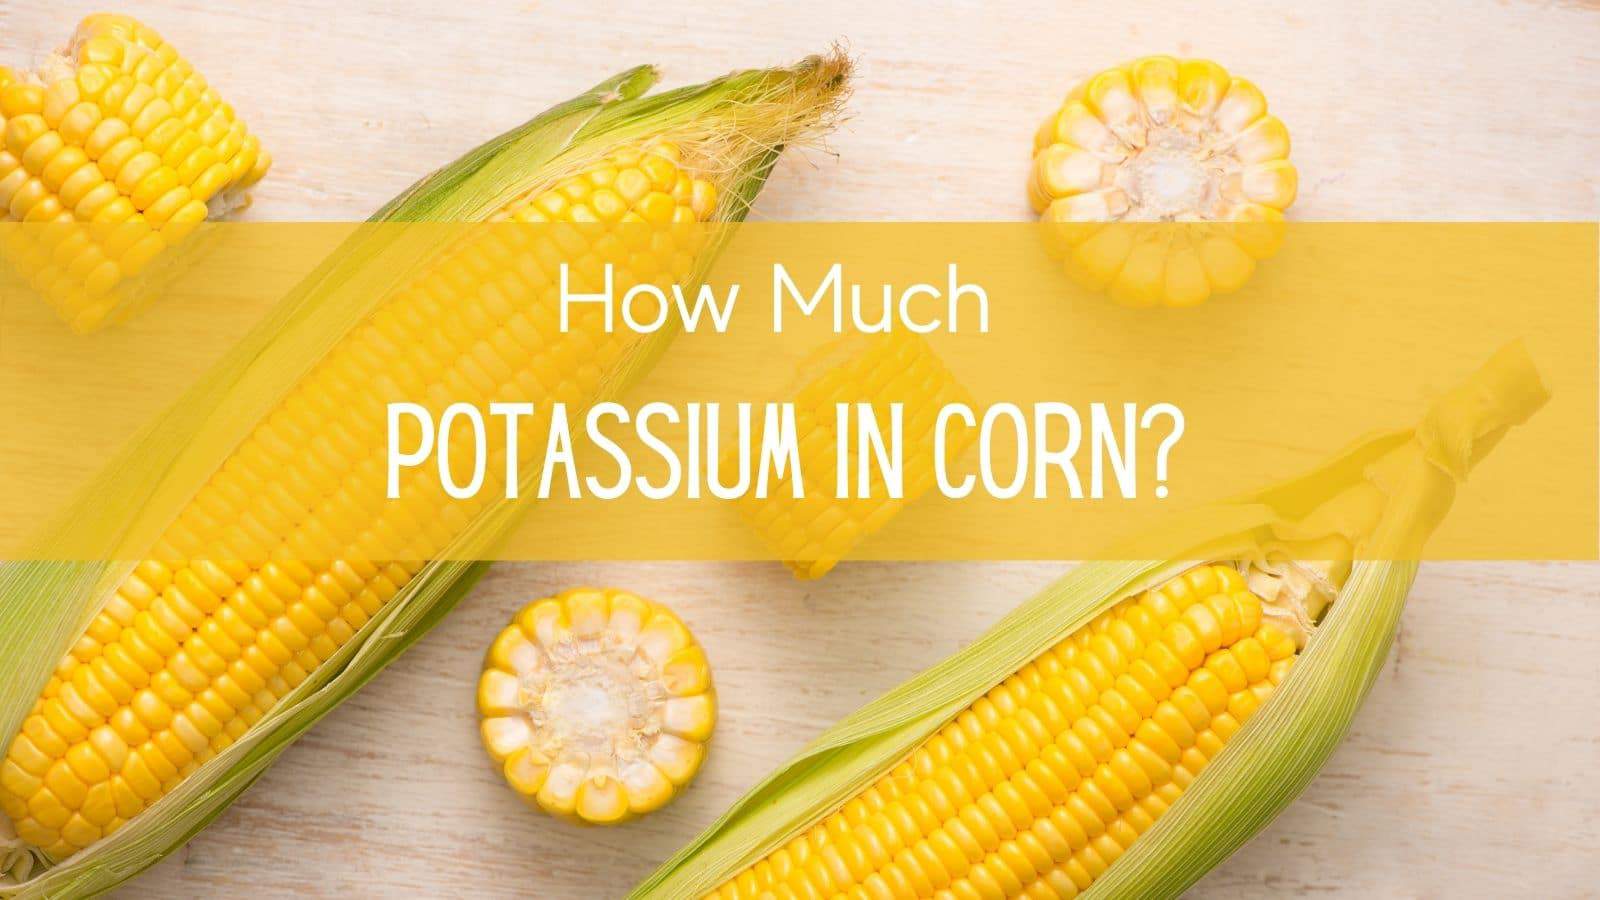 How Much Potassium in Corn? - The Kidney Dietitian